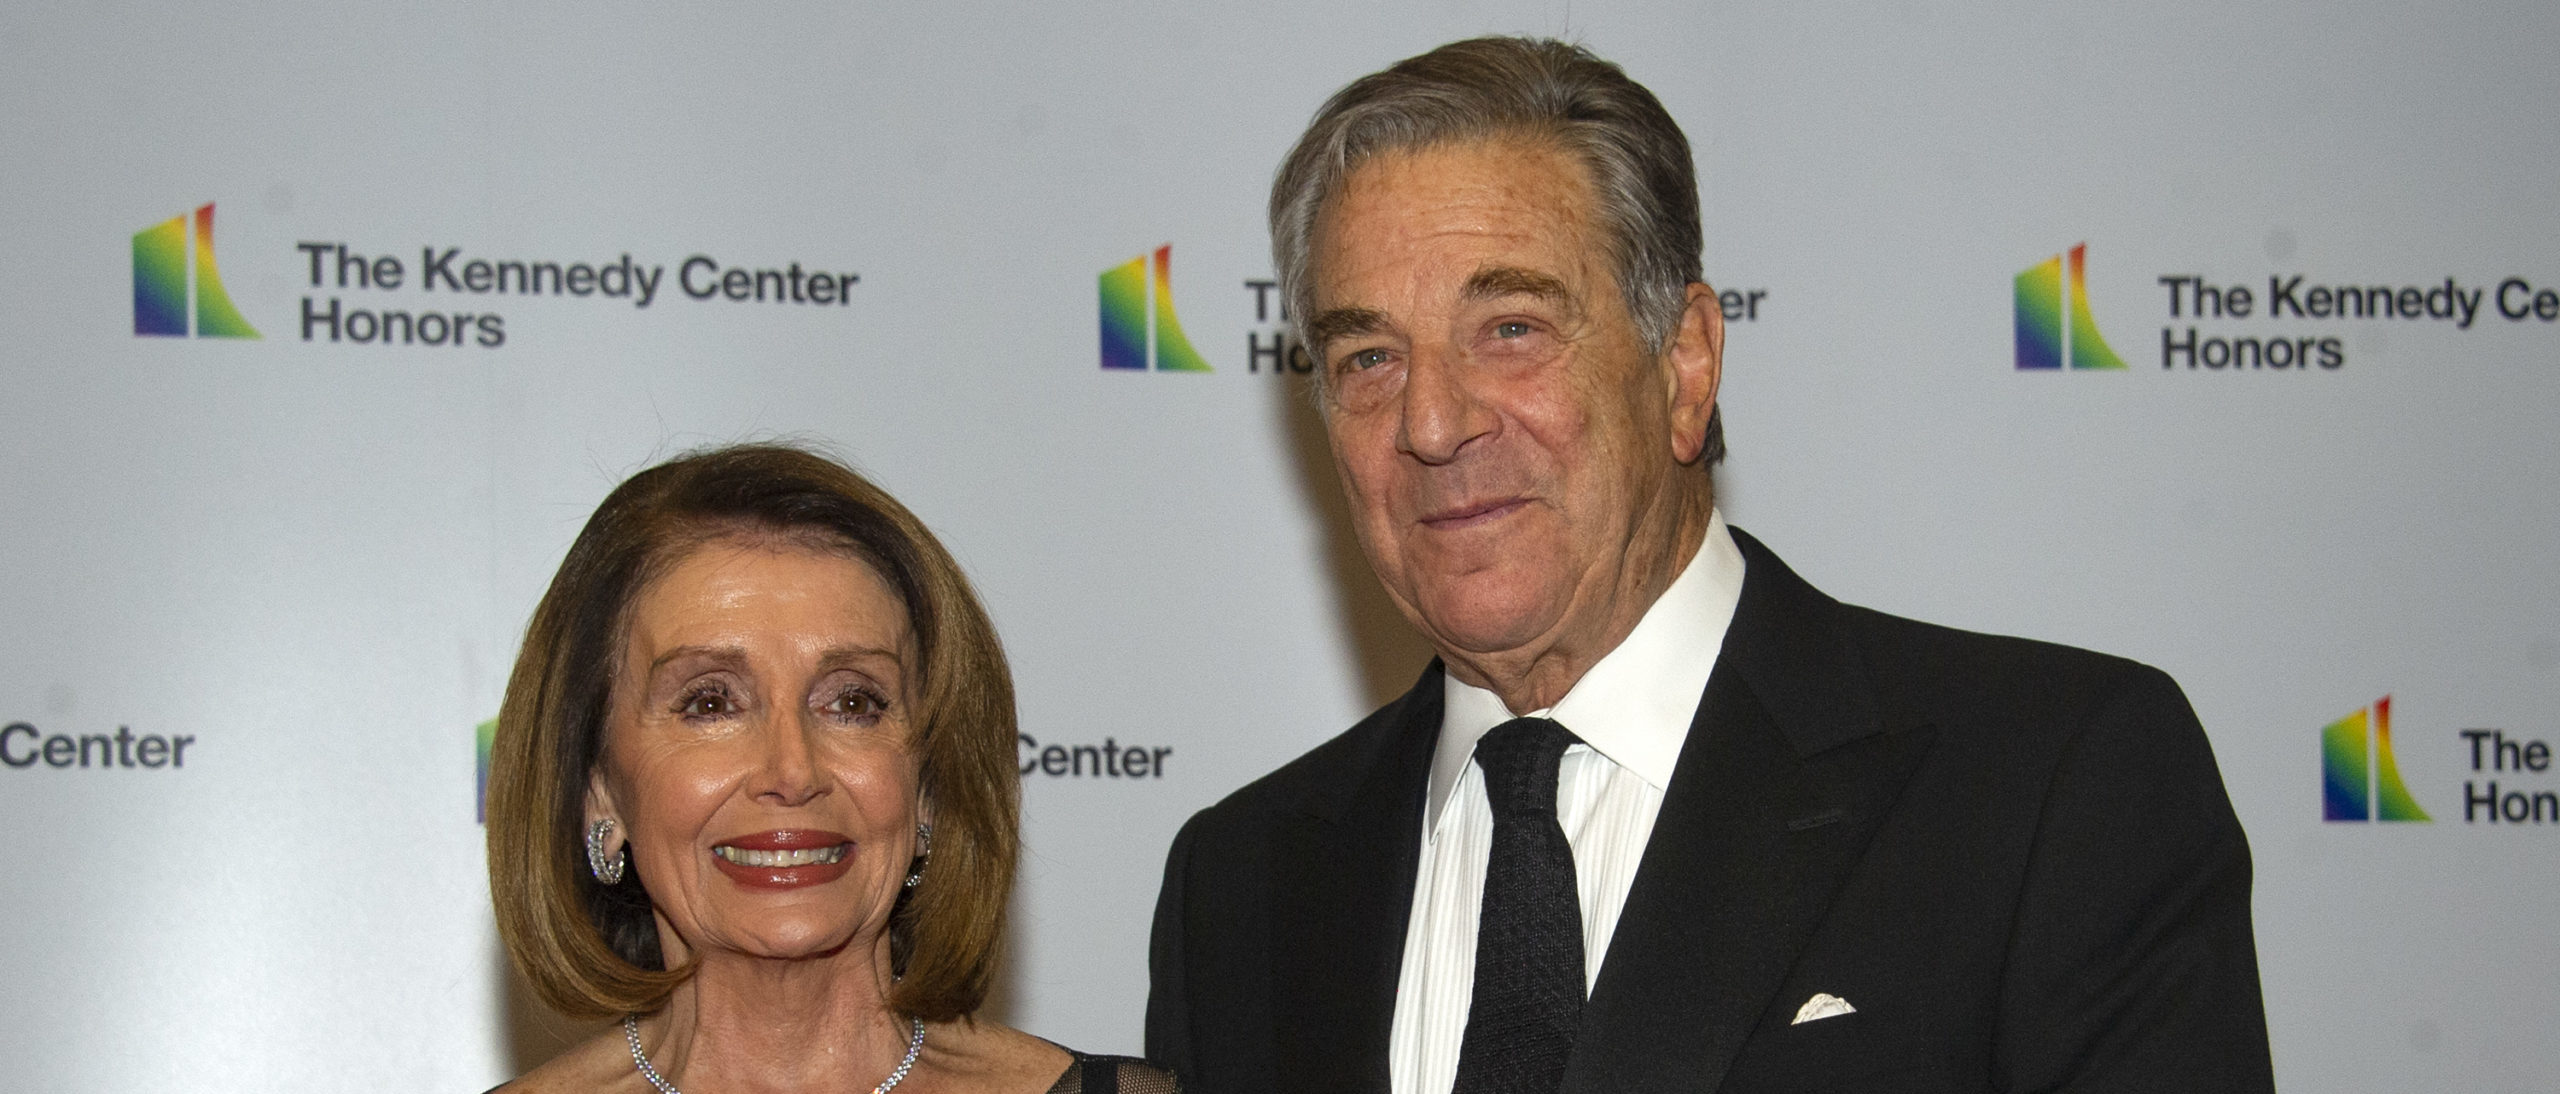 Nancy Pelosi’s Husband Unloads Massive Stake In Chips Stock For Huge Loss After Buying Shares Before Subsidy Vote